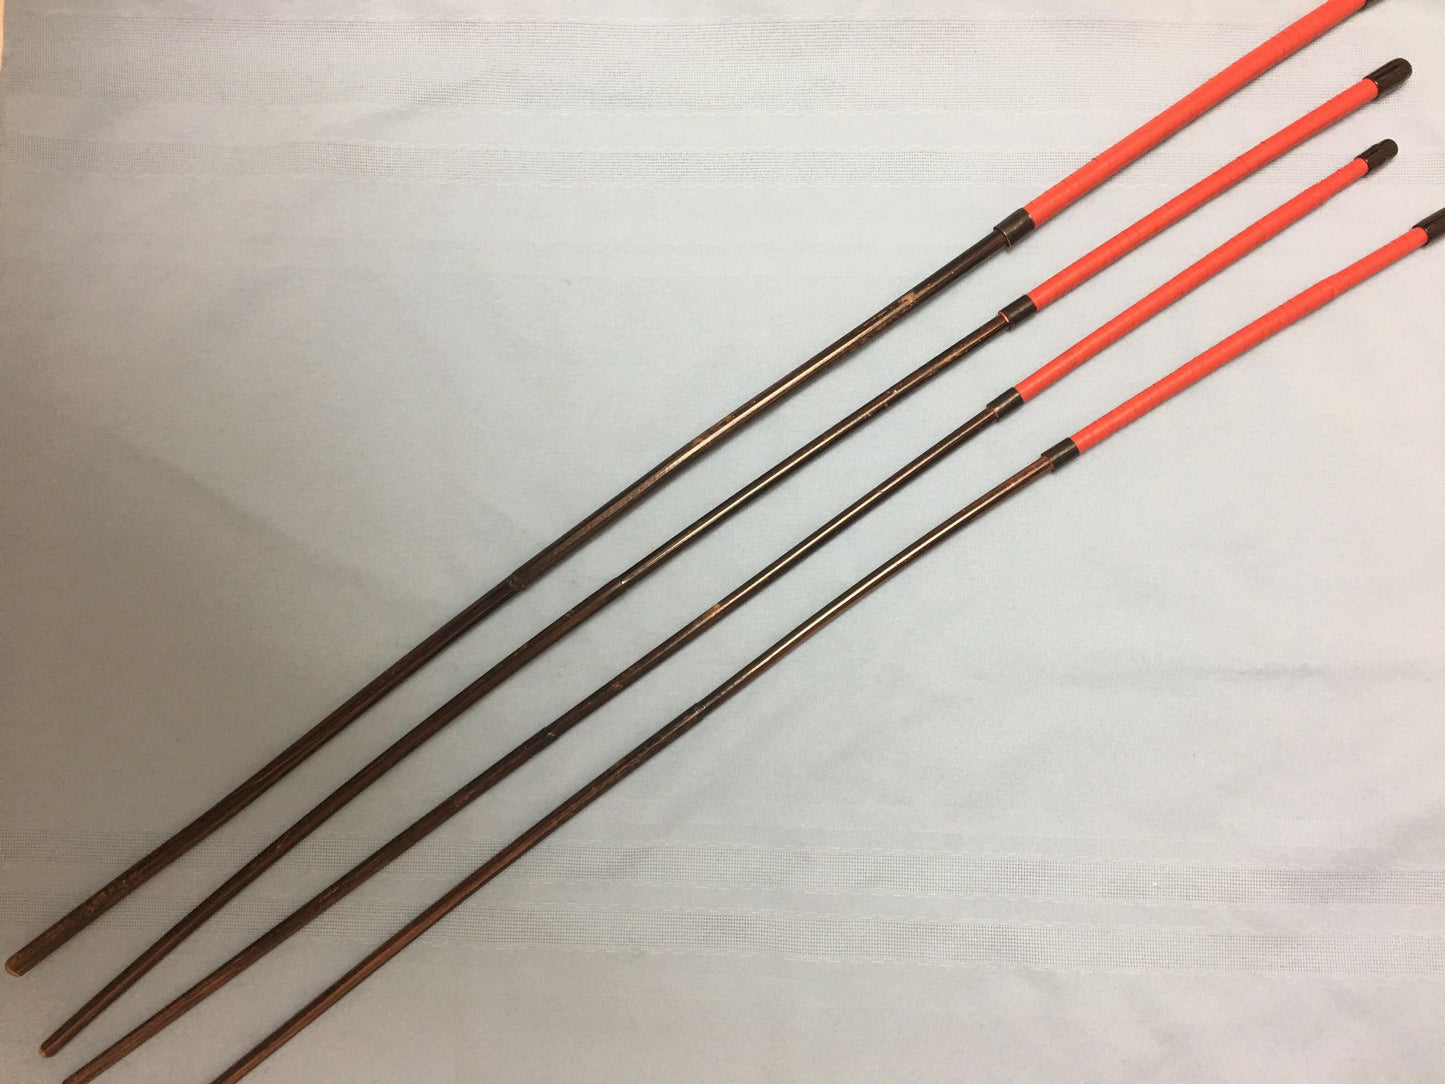 Set of 4 Smoked Dragon Canes 95 - 100 cms with Red Kangaroo Leather Handles